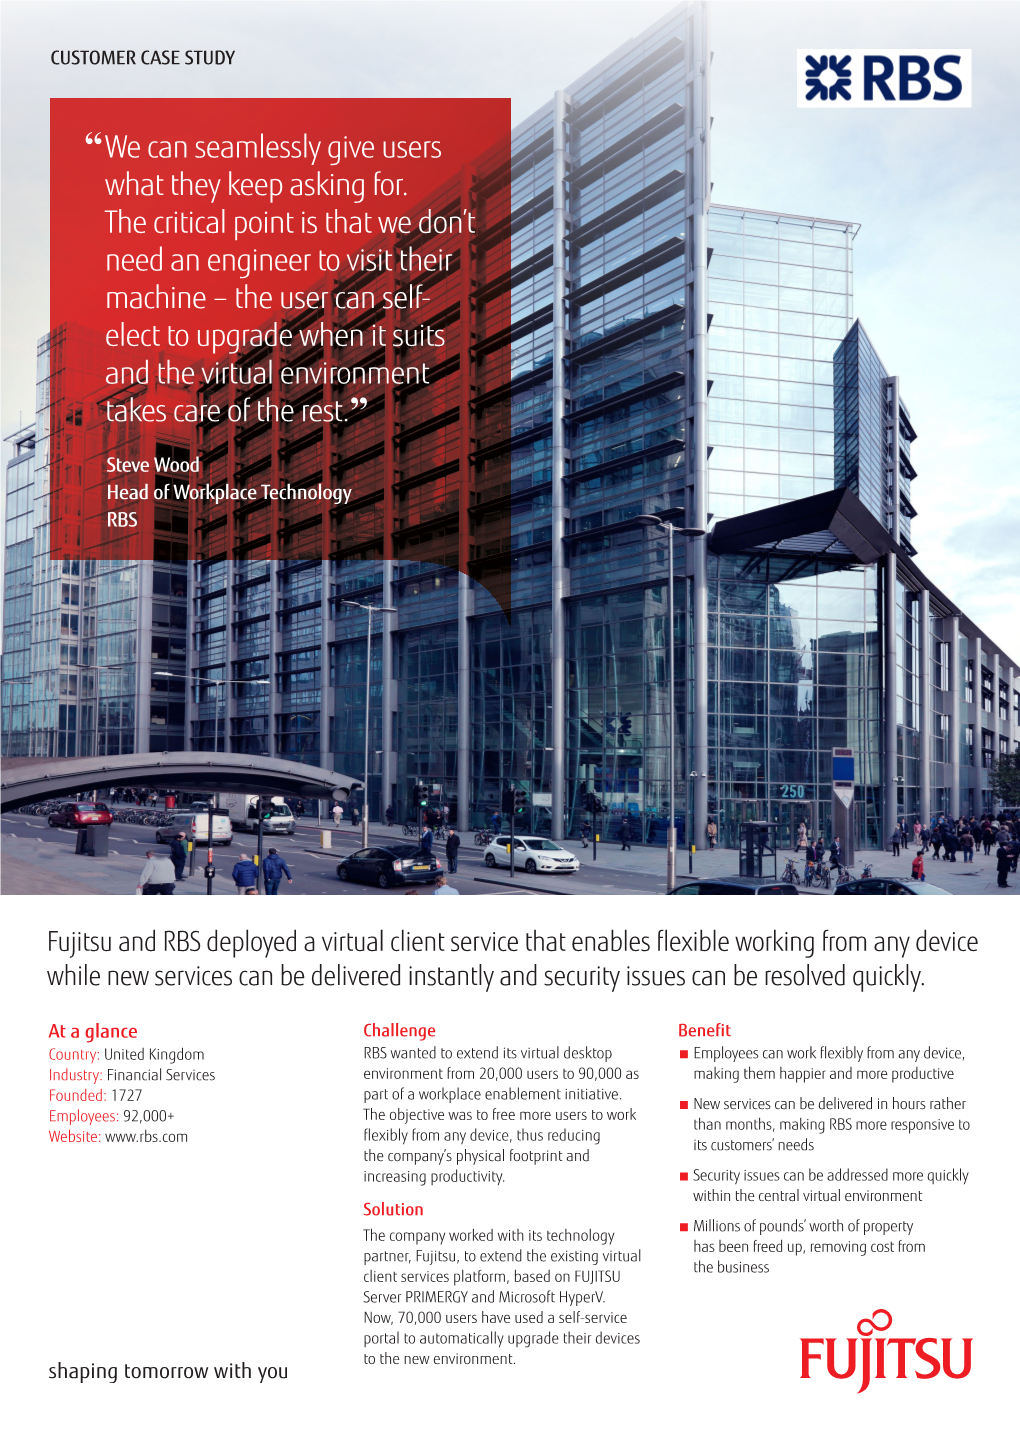 As Part of a Workplace Enablement Initiative, Fujitsu Helped Royal Bank